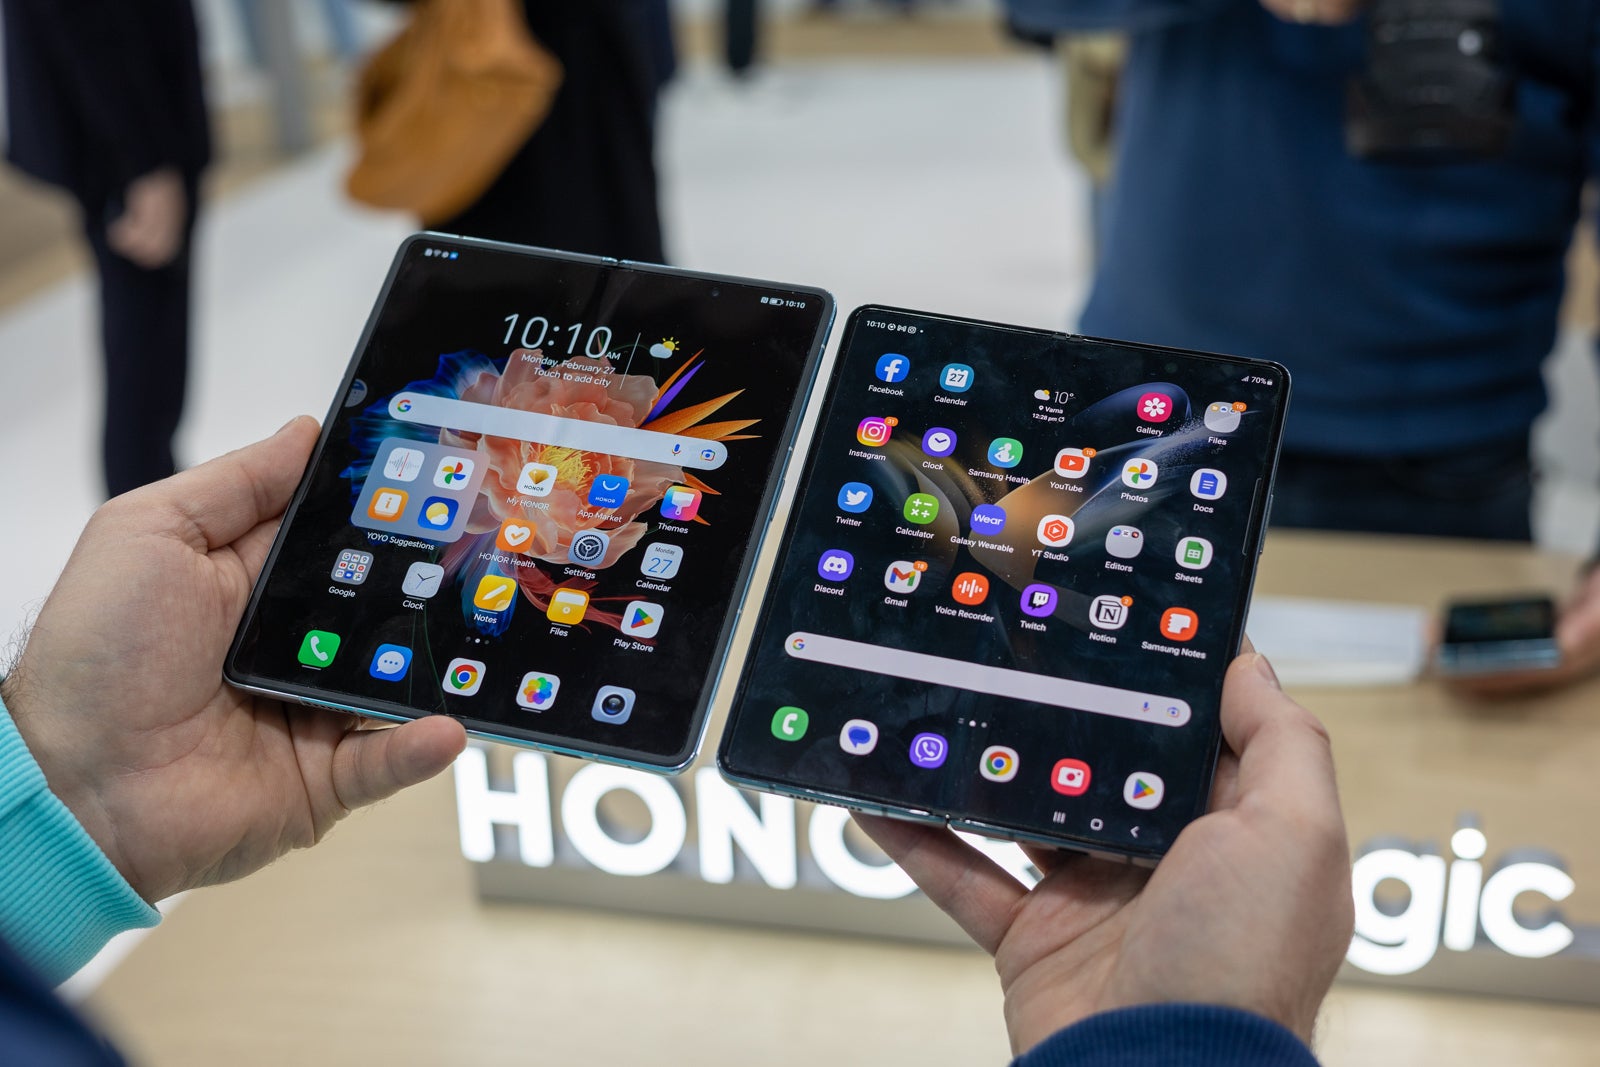 (Image Credit - PhoneArena) - Honor Magic Vs Hands-on Preview: Finally, some good competition to Galaxy Fold 4!